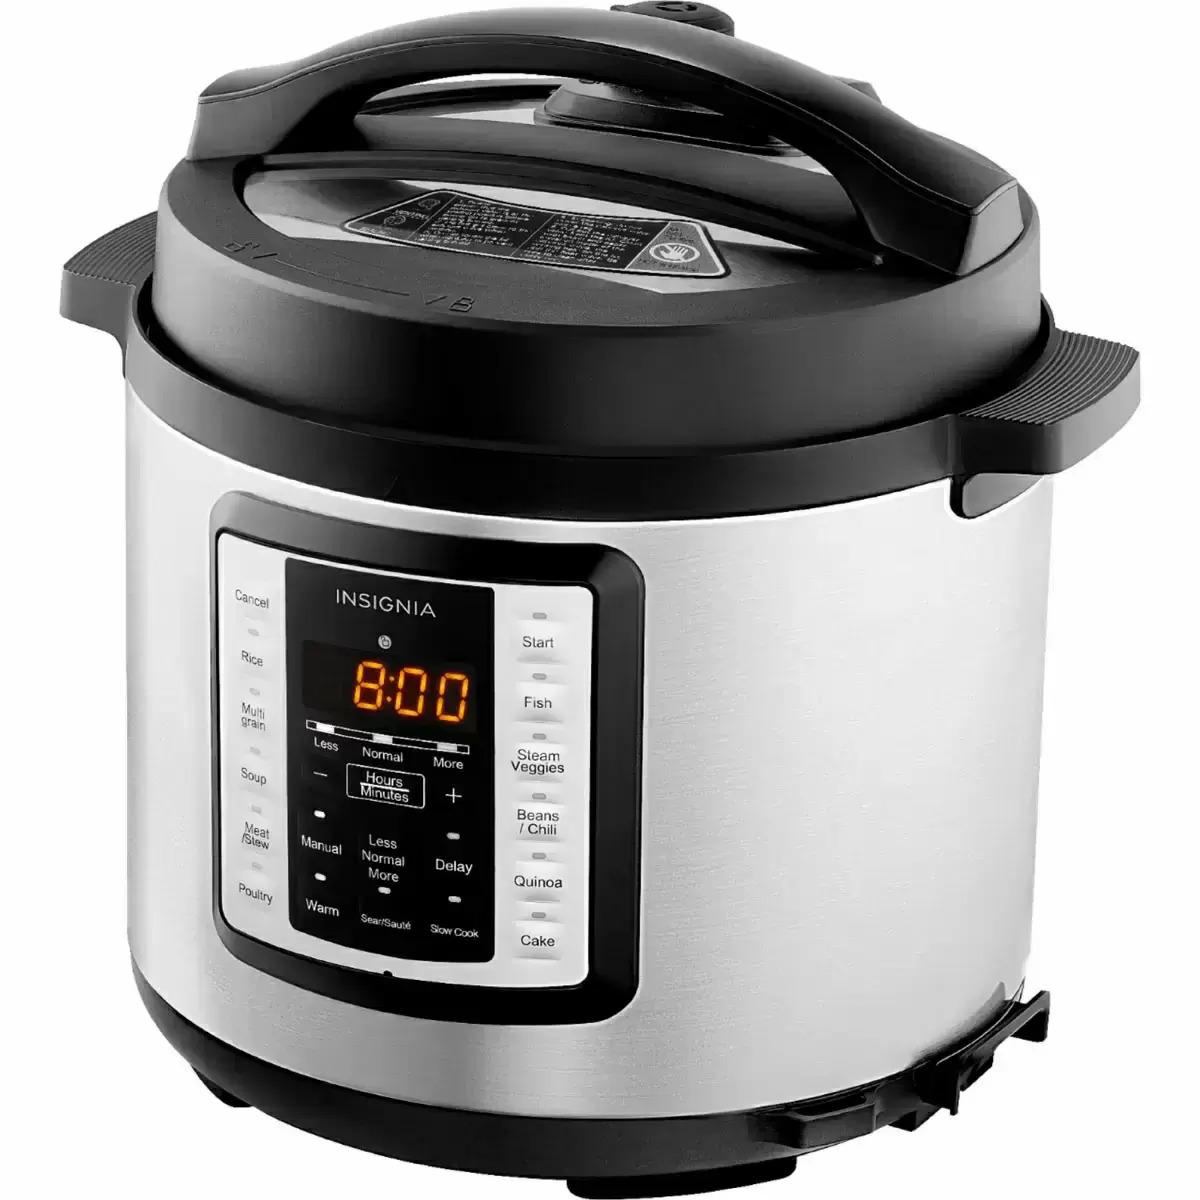 Insignia 6Q Multi-Function Stainless Steel Pressure Cooker Deals